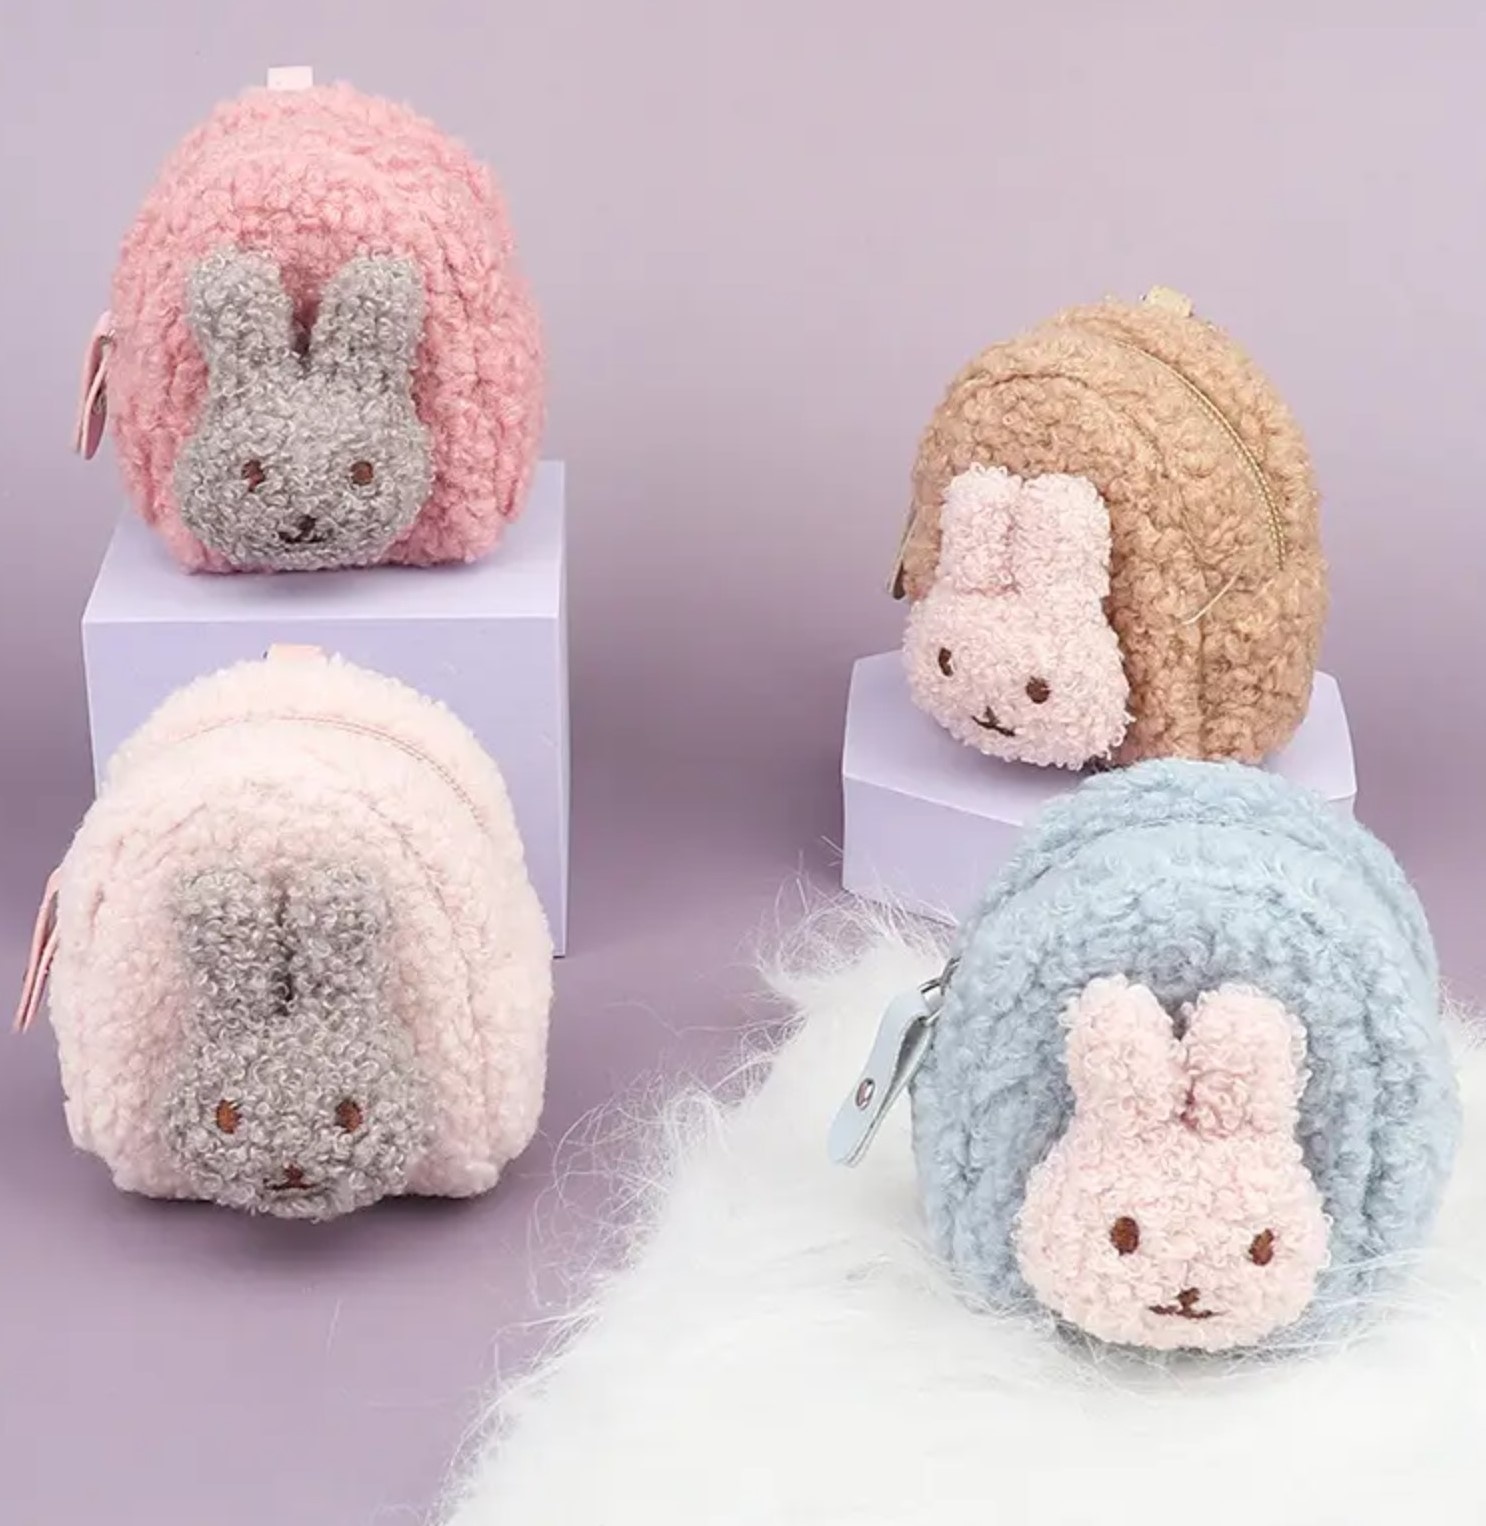 Amazon.com: Didiseaon 8 Pcs Bunny Coin Purse Silicone Lovely Change Purse  Bunny Bag Small Wallet Kawaii Stuff Cute Coin Purse Clothes Storage Bag  Wallet for Women China Animal White Miss : Clothing,